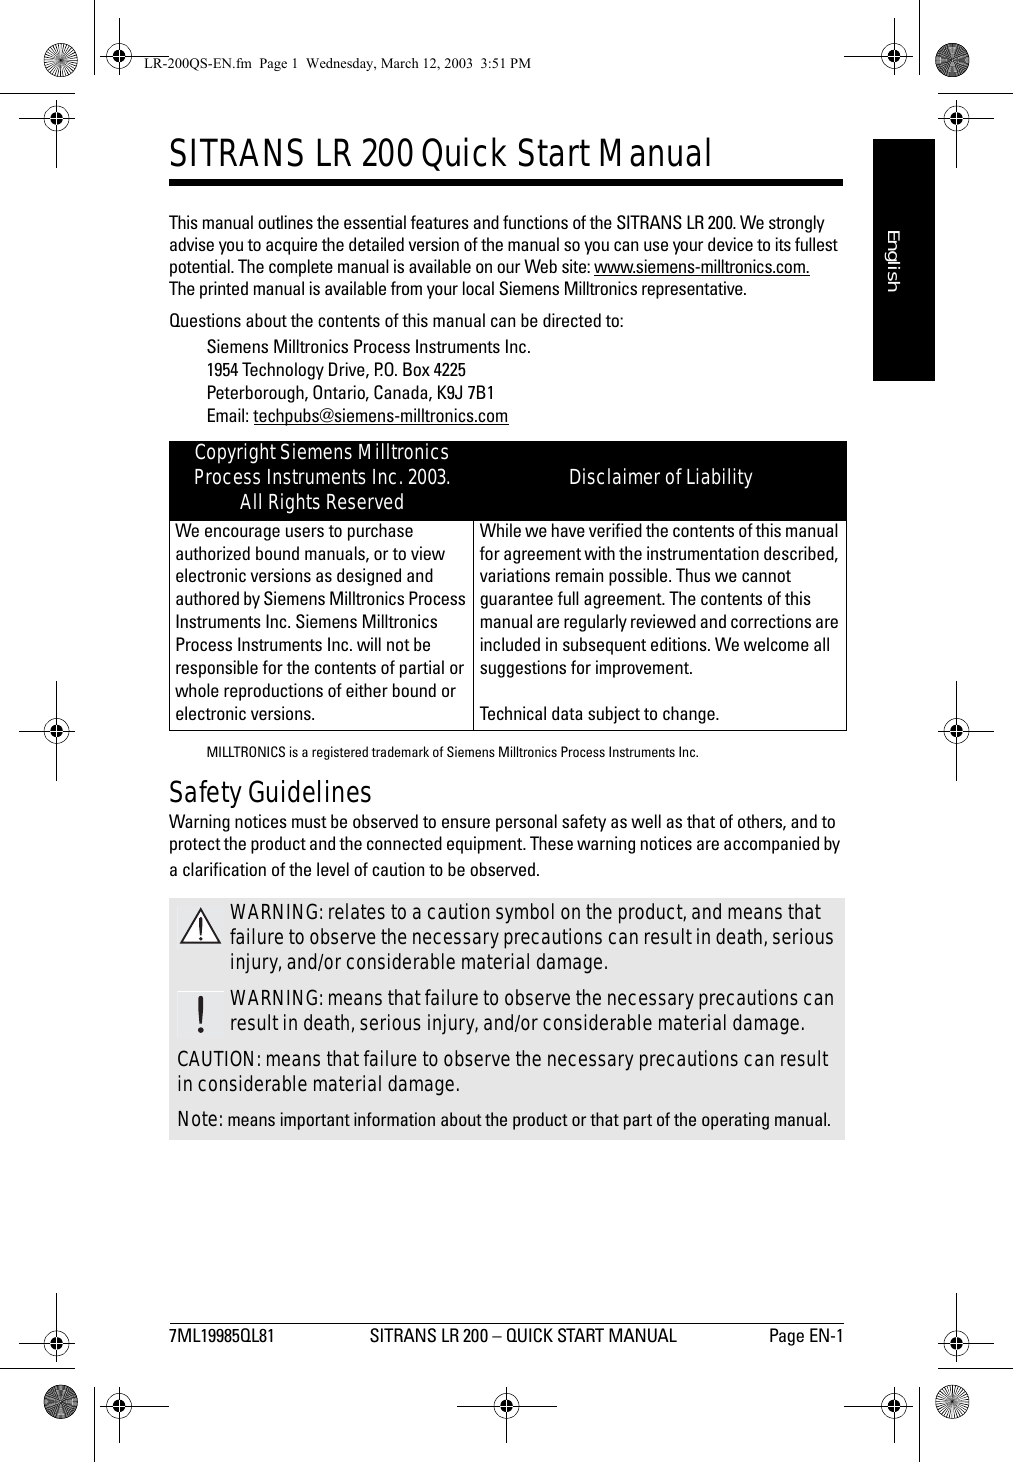 7ML19985QL81 SITRANS LR 200 – QUICK START MANUAL Page EN-1mmmmmEnglishSITRANS LR 200 Quick Start Manual This manual outlines the essential features and functions of the SITRANS LR 200. We strongly advise you to acquire the detailed version of the manual so you can use your device to its fullest potential. The complete manual is available on our Web site: www.siemens-milltronics.com. The printed manual is available from your local Siemens Milltronics representative.Questions about the contents of this manual can be directed to:Siemens Milltronics Process Instruments Inc.1954 Technology Drive, P.O. Box 4225Peterborough, Ontario, Canada, K9J 7B1Email: techpubs@siemens-milltronics.comMILLTRONICS is a registered trademark of Siemens Milltronics Process Instruments Inc.Safety GuidelinesWarning notices must be observed to ensure personal safety as well as that of others, and to protect the product and the connected equipment. These warning notices are accompanied by a clarification of the level of caution to be observed.Copyright Siemens Milltronics Process Instruments Inc. 2003. All Rights Reserved Disclaimer of LiabilityWe encourage users to purchase authorized bound manuals, or to view electronic versions as designed and authored by Siemens Milltronics Process Instruments Inc. Siemens Milltronics Process Instruments Inc. will not be responsible for the contents of partial or whole reproductions of either bound or electronic versions.While we have verified the contents of this manual for agreement with the instrumentation described, variations remain possible. Thus we cannot guarantee full agreement. The contents of this manual are regularly reviewed and corrections are included in subsequent editions. We welcome all suggestions for improvement.Technical data subject to change.WARNING: relates to a caution symbol on the product, and means that failure to observe the necessary precautions can result in death, serious injury, and/or considerable material damage.WARNING: means that failure to observe the necessary precautions can result in death, serious injury, and/or considerable material damage.CAUTION: means that failure to observe the necessary precautions can result in considerable material damage.Note: means important information about the product or that part of the operating manual.LR-200QS-EN.fm  Page 1  Wednesday, March 12, 2003  3:51 PM